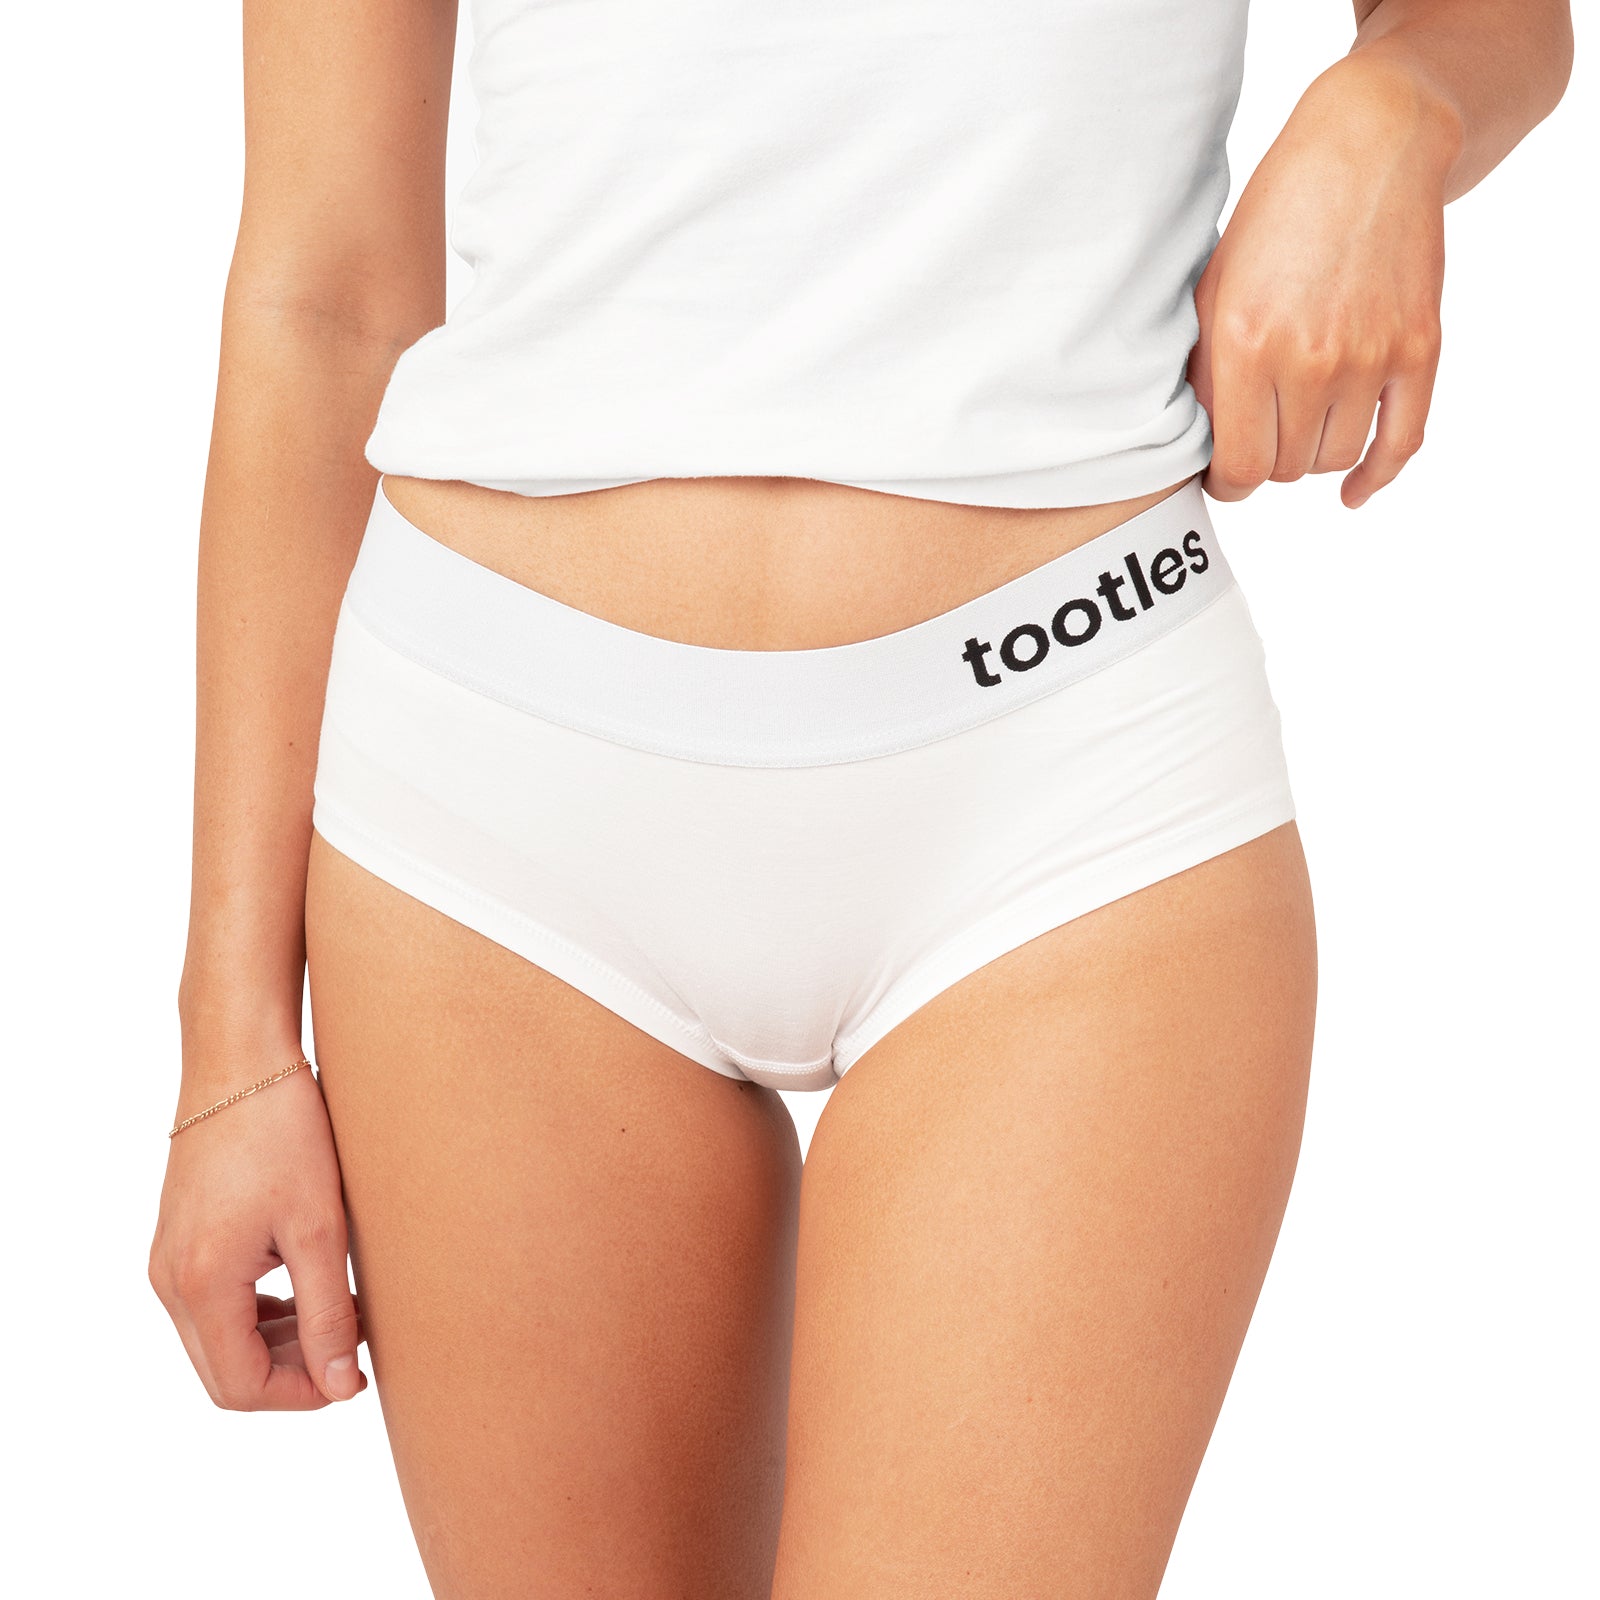 Fart Filtering Underwear Gets Rid Of The Stink! Neutralizes The